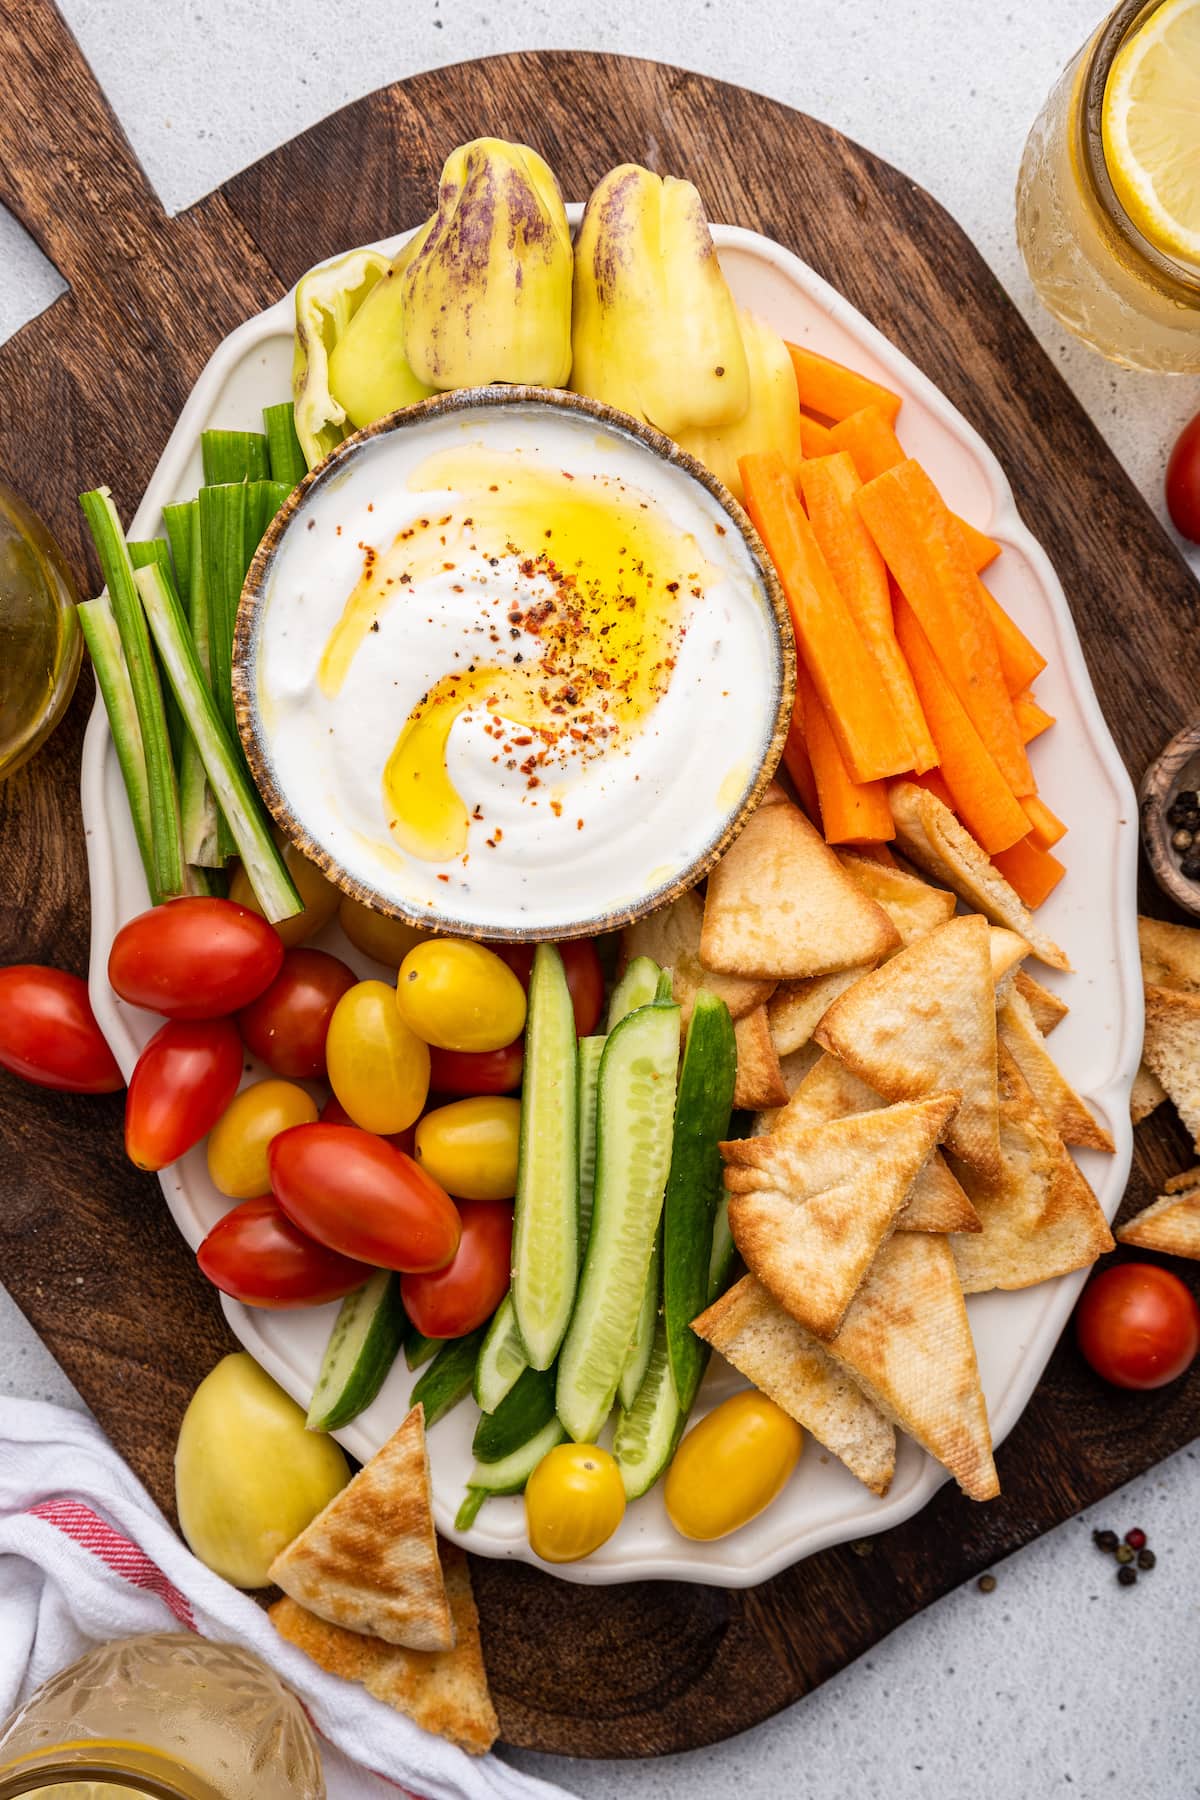 Whipped cottage cheese in a small dipping bowl that is on a serving plate that is on a wooden cutting board. Around the small bowl of whipped cottage cheese are vegetables and chips that include tomatoes, carrots, cucumbers, peppers, and pita chips.